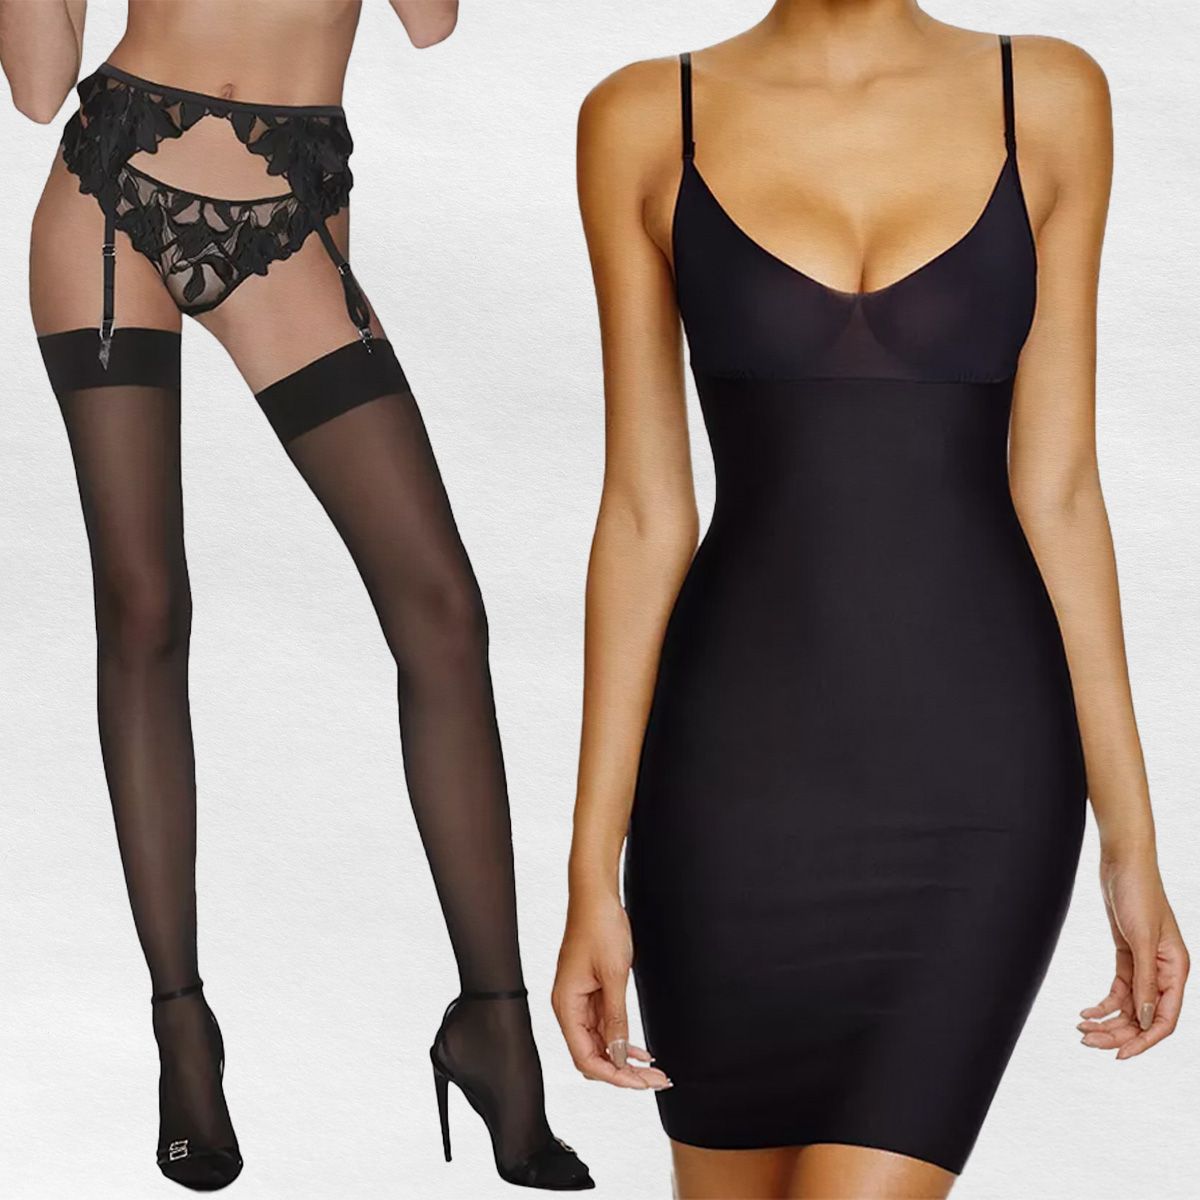 20 Confidence-Boosting Lingerie Pieces You Need